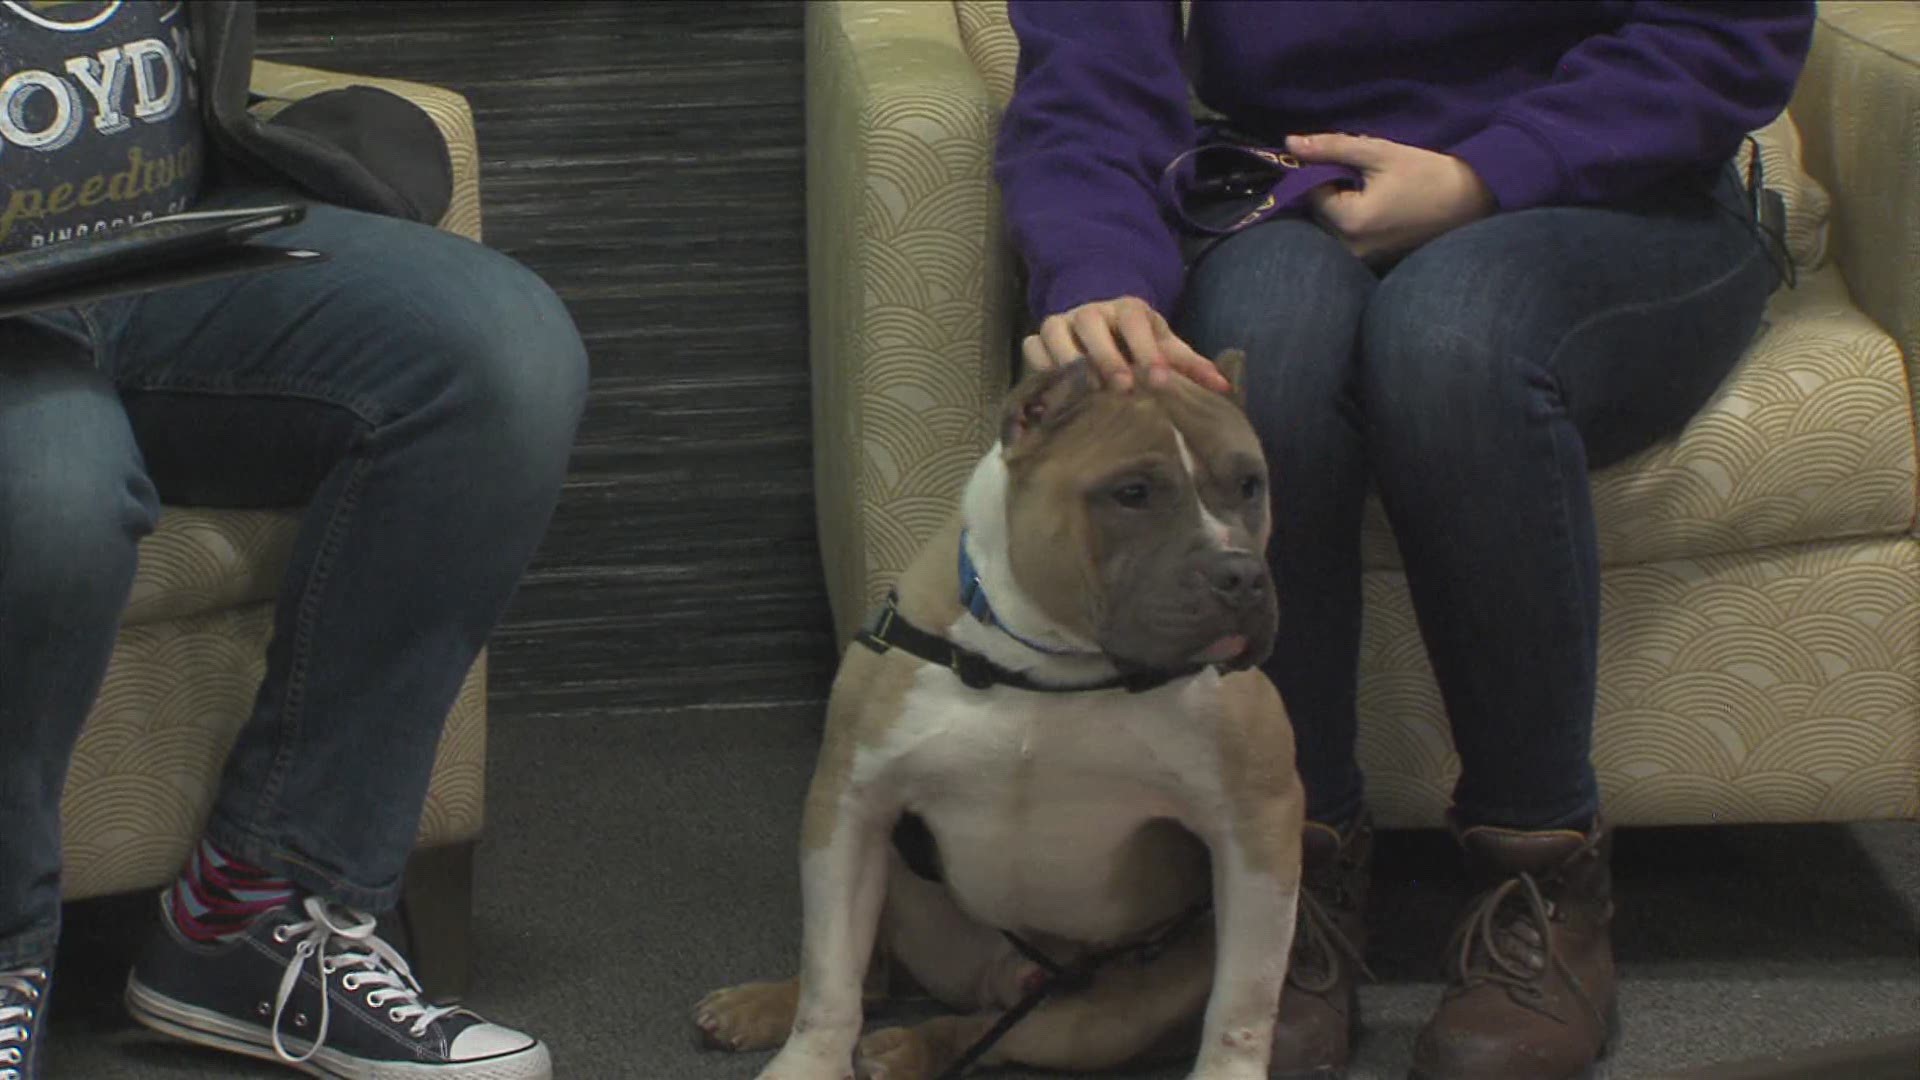 Ray visits Iowa Live in hopes to find a forever home.